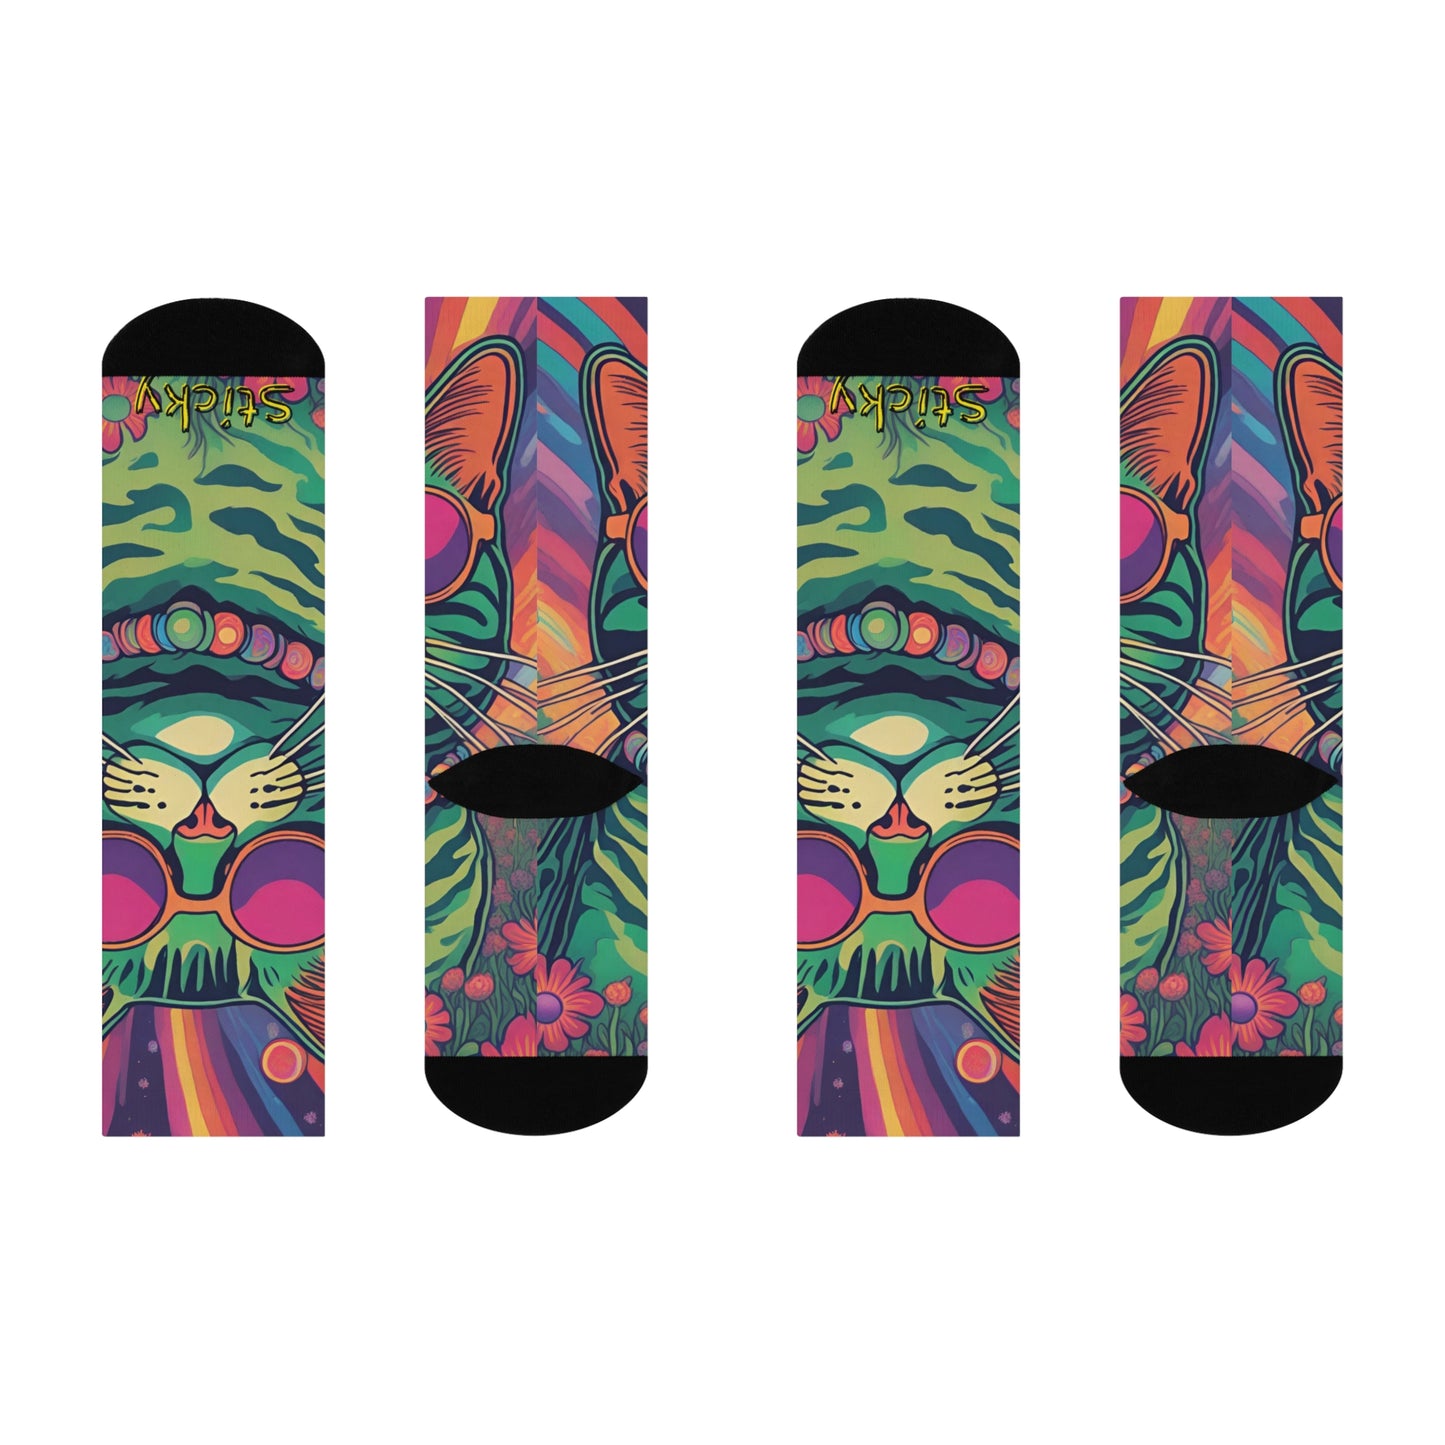 Green - Psychedelic Sticky - SUPER COMFY Cushioned Crew Socks